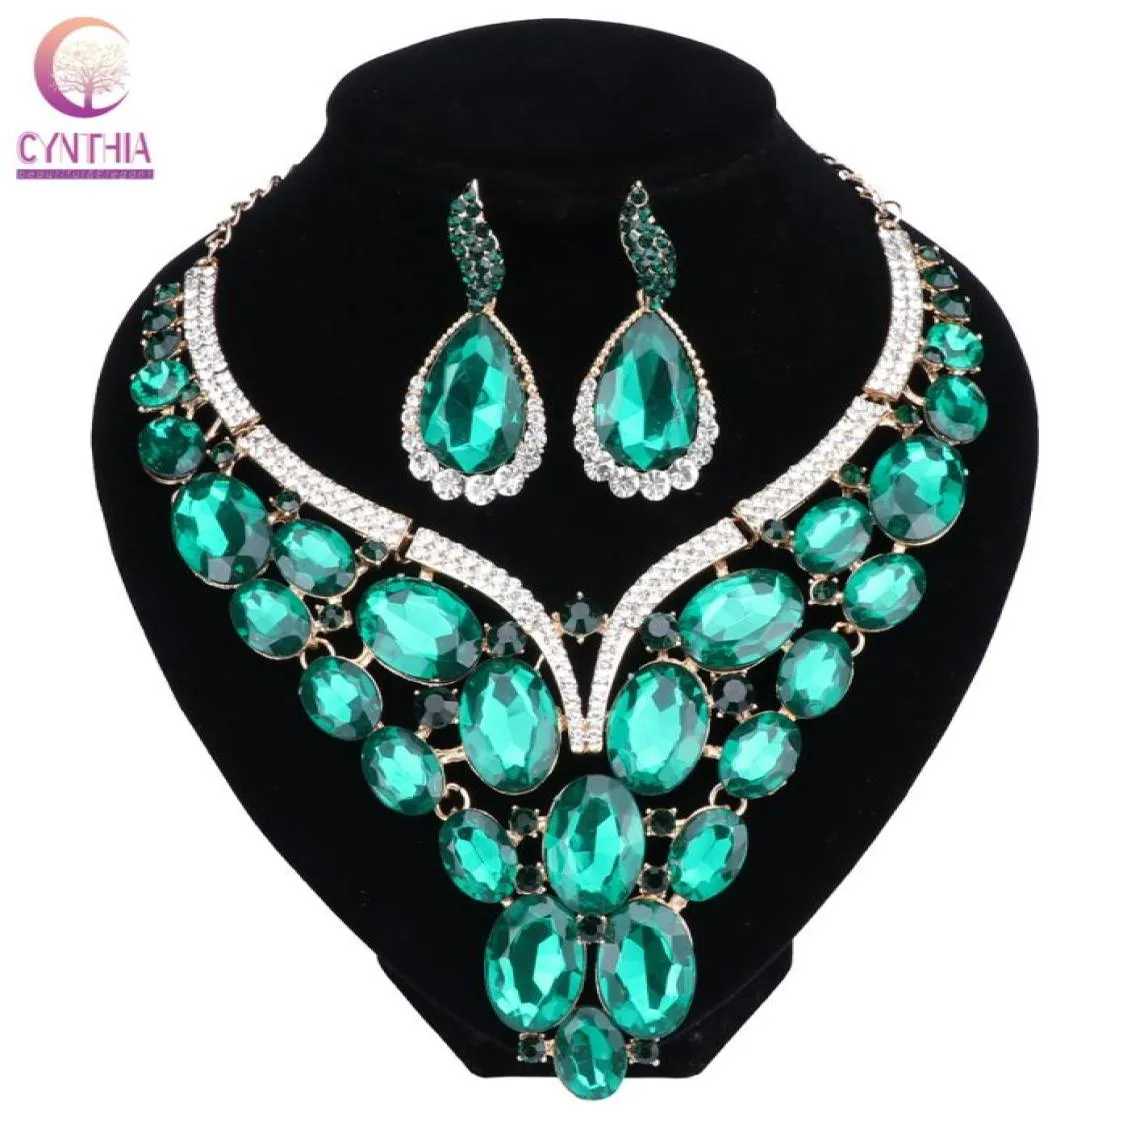 Fashion Jewelry Chunky Gem Crystal Flower Choker Necklace Statement Necklace Earring Party Dress Jewelry Sets 10 Colors9881488